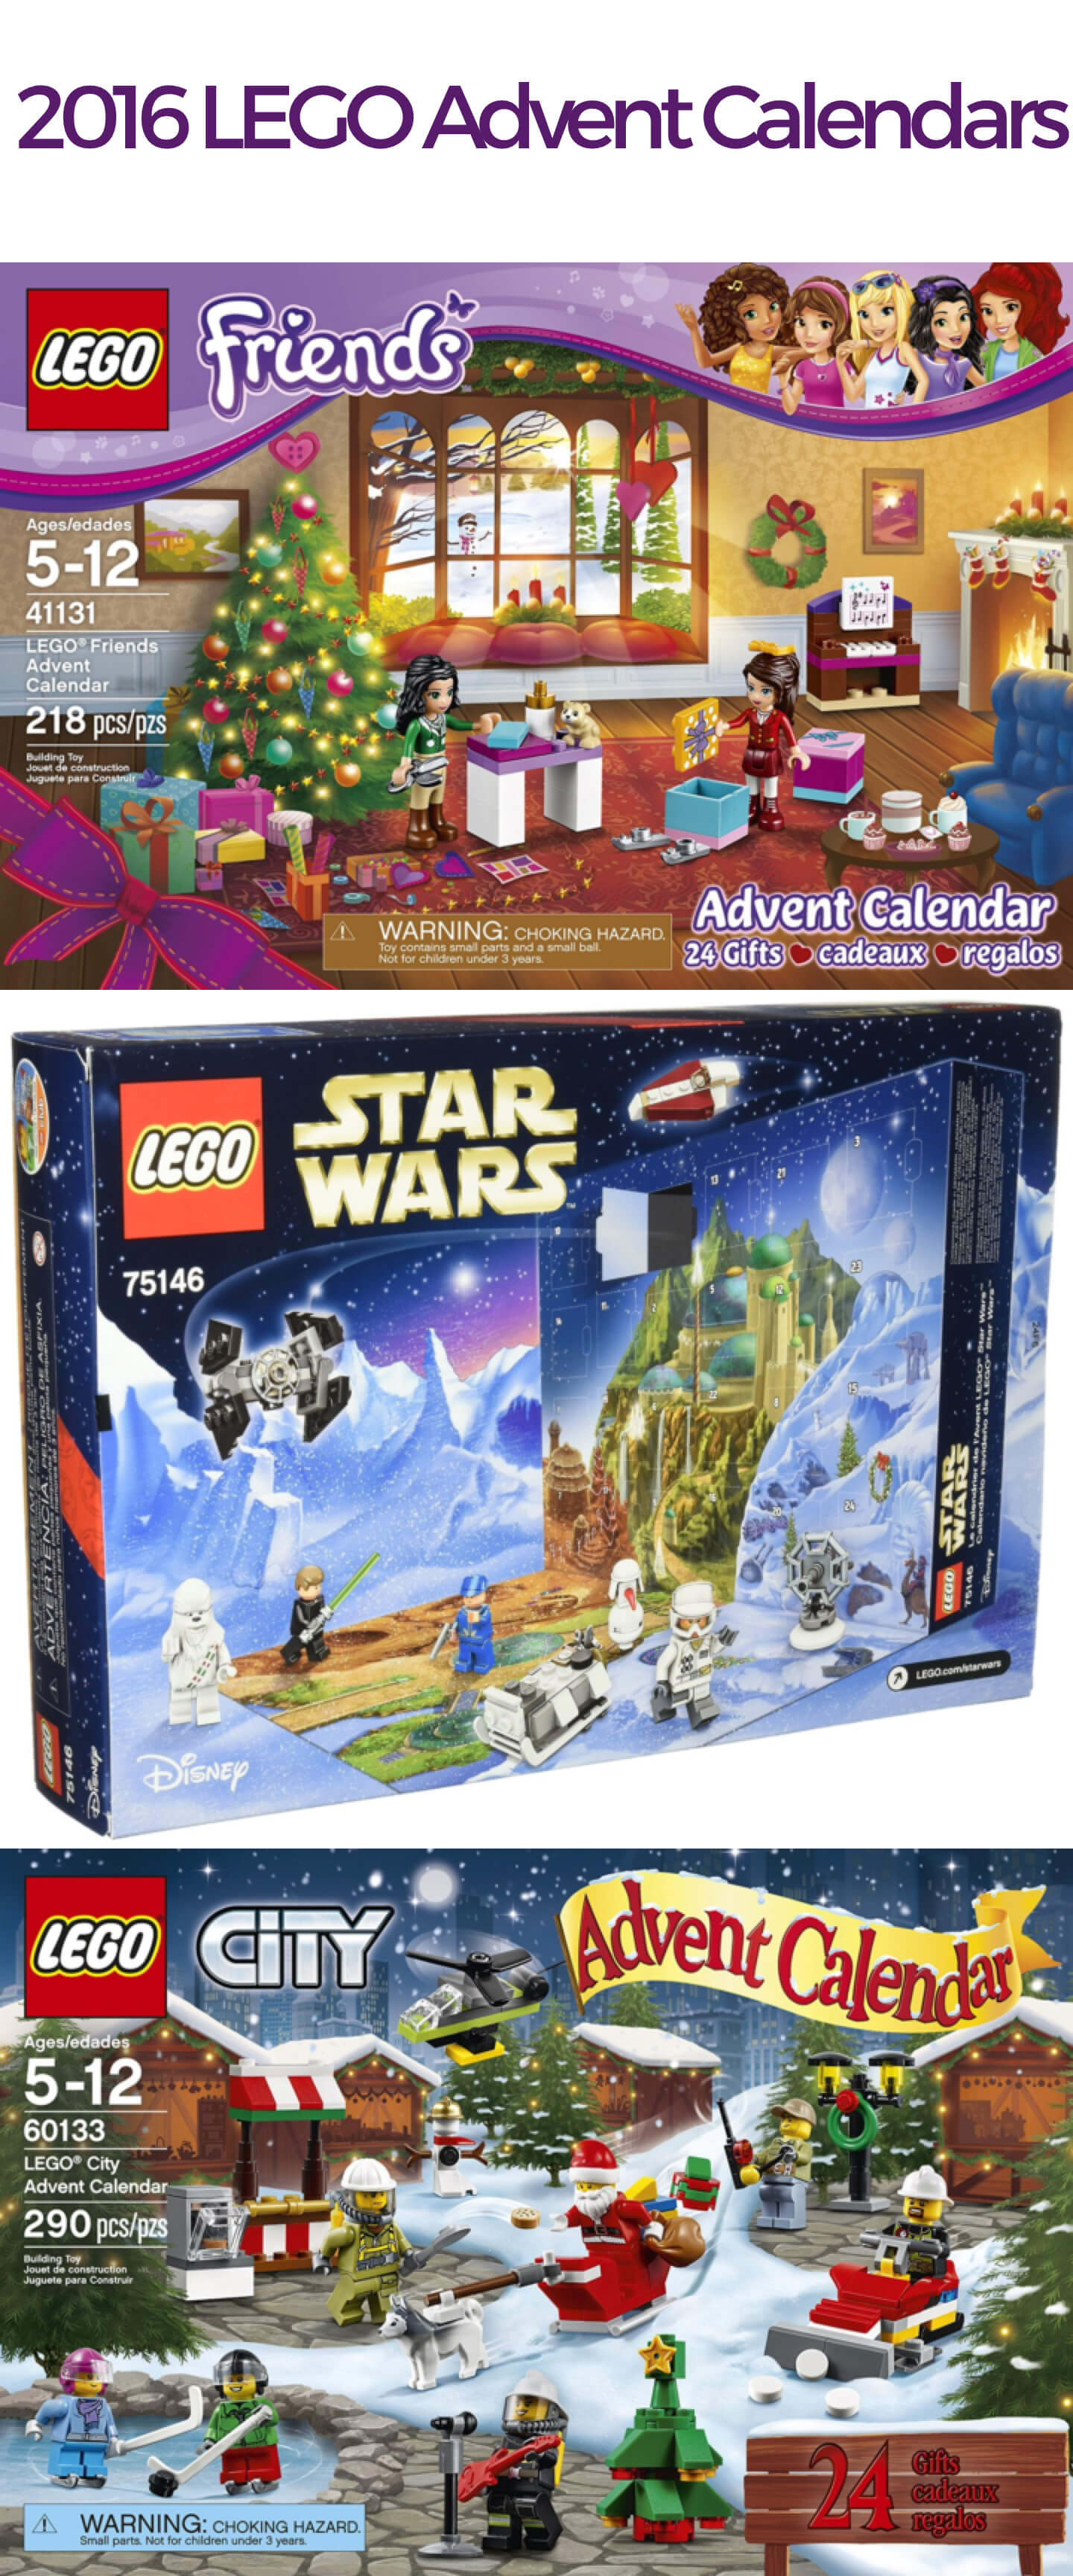 Lego 2016 Advent Calendars Available Now! Star Wars, Friends, City Town